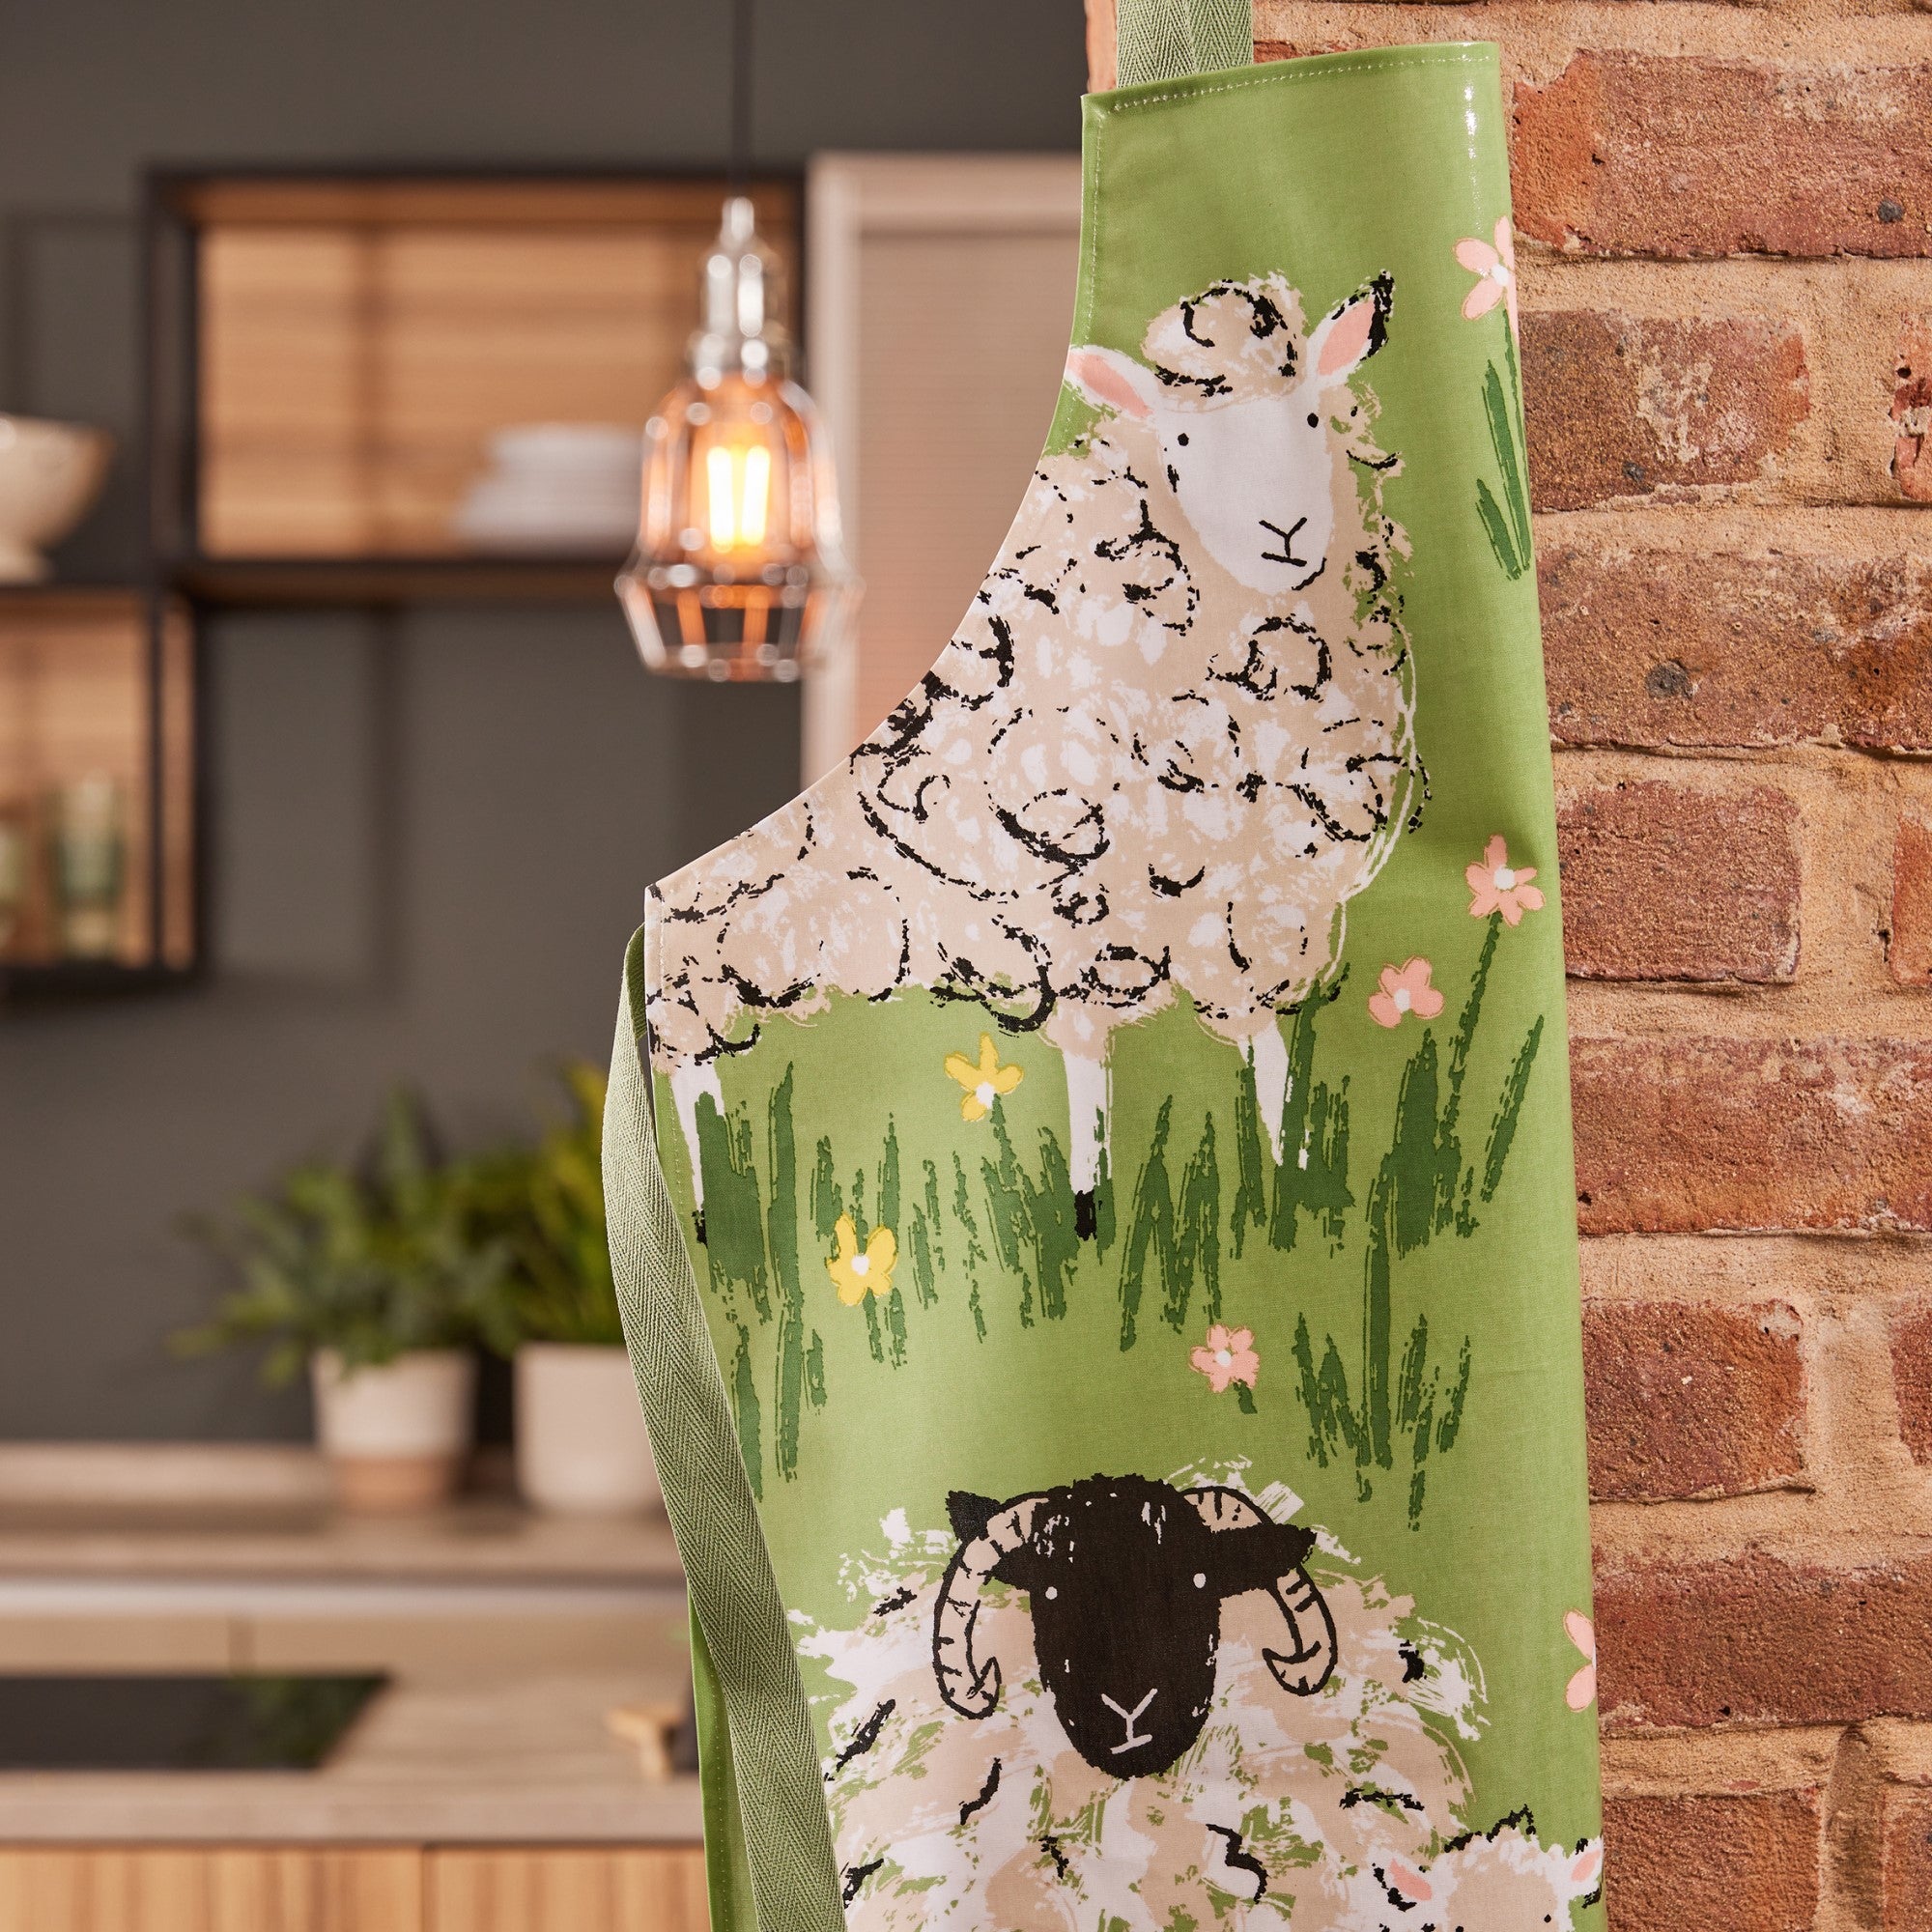 Ulster Weavers Woolly Sheep Apron - PVC/Oilcloth One Size in Green - Apron - Ulster Weavers